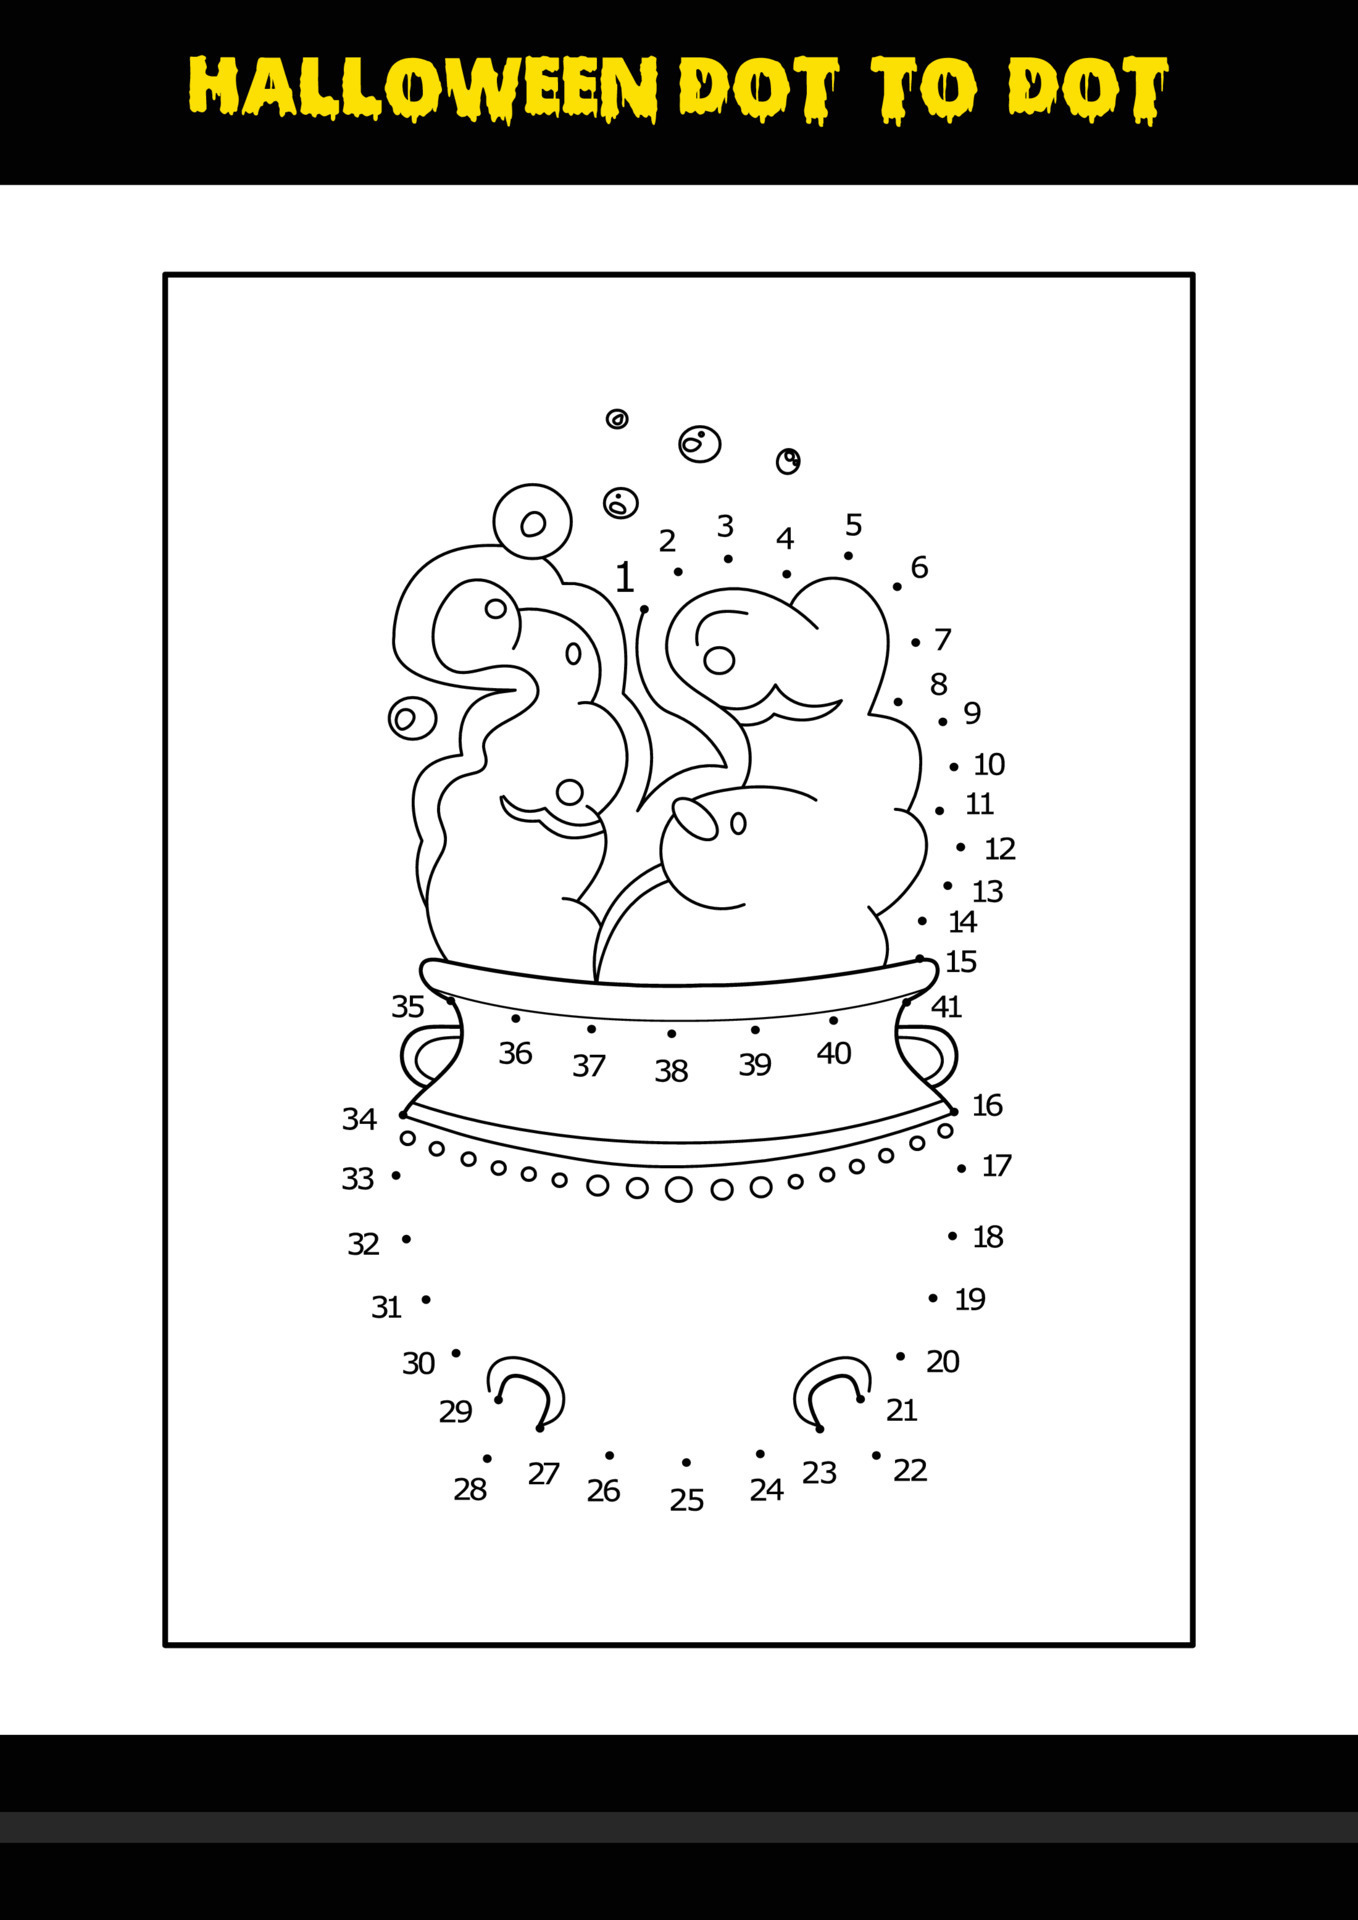 halloween-dot-to-dot-coloring-page-for-kids-line-art-coloring-page-design-for-kids-12983383